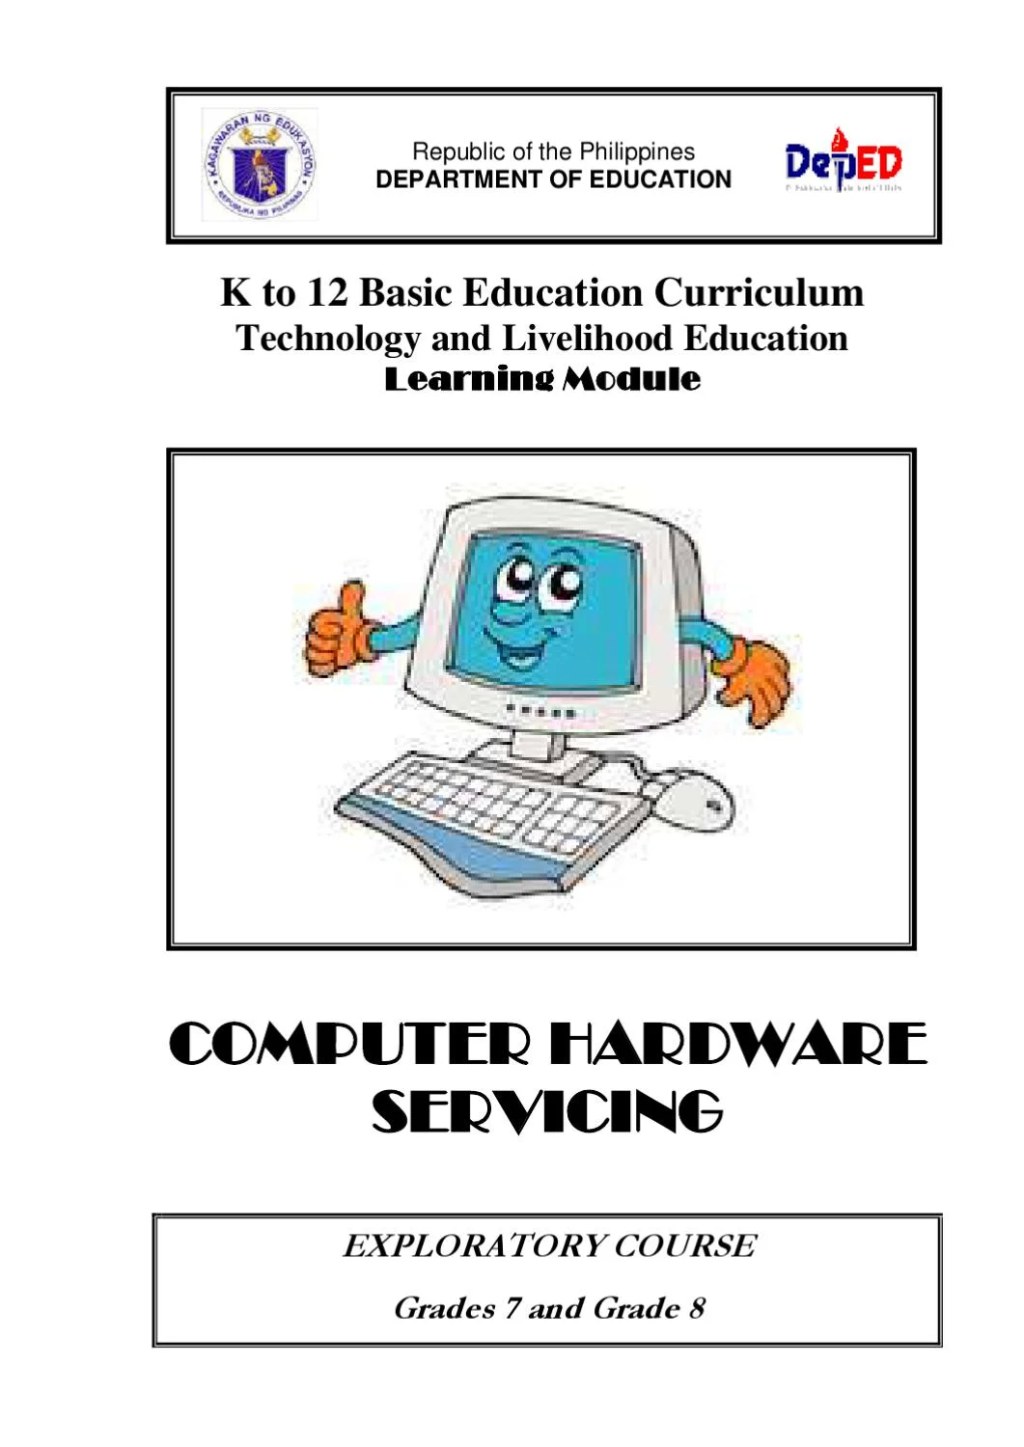 Picture of: K TO  PC HARDWARE SERVICING LEARNING MODULE by Edgar Garcia – Issuu